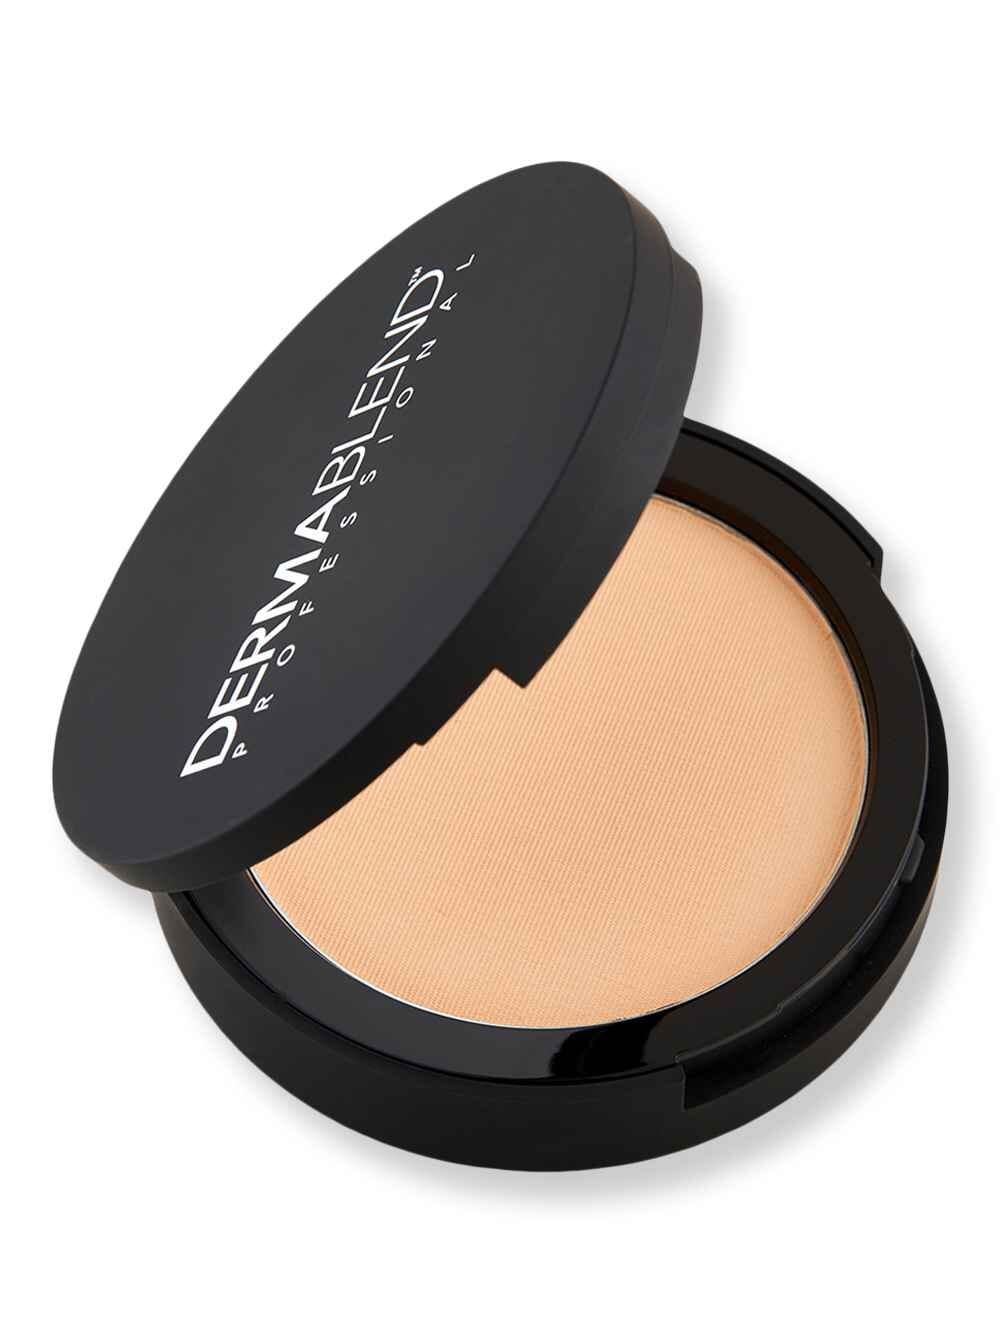 Dermablend Dermablend Intense Powder Camo Compact Foundation 25N Natural Tinted Moisturizers & Foundations 